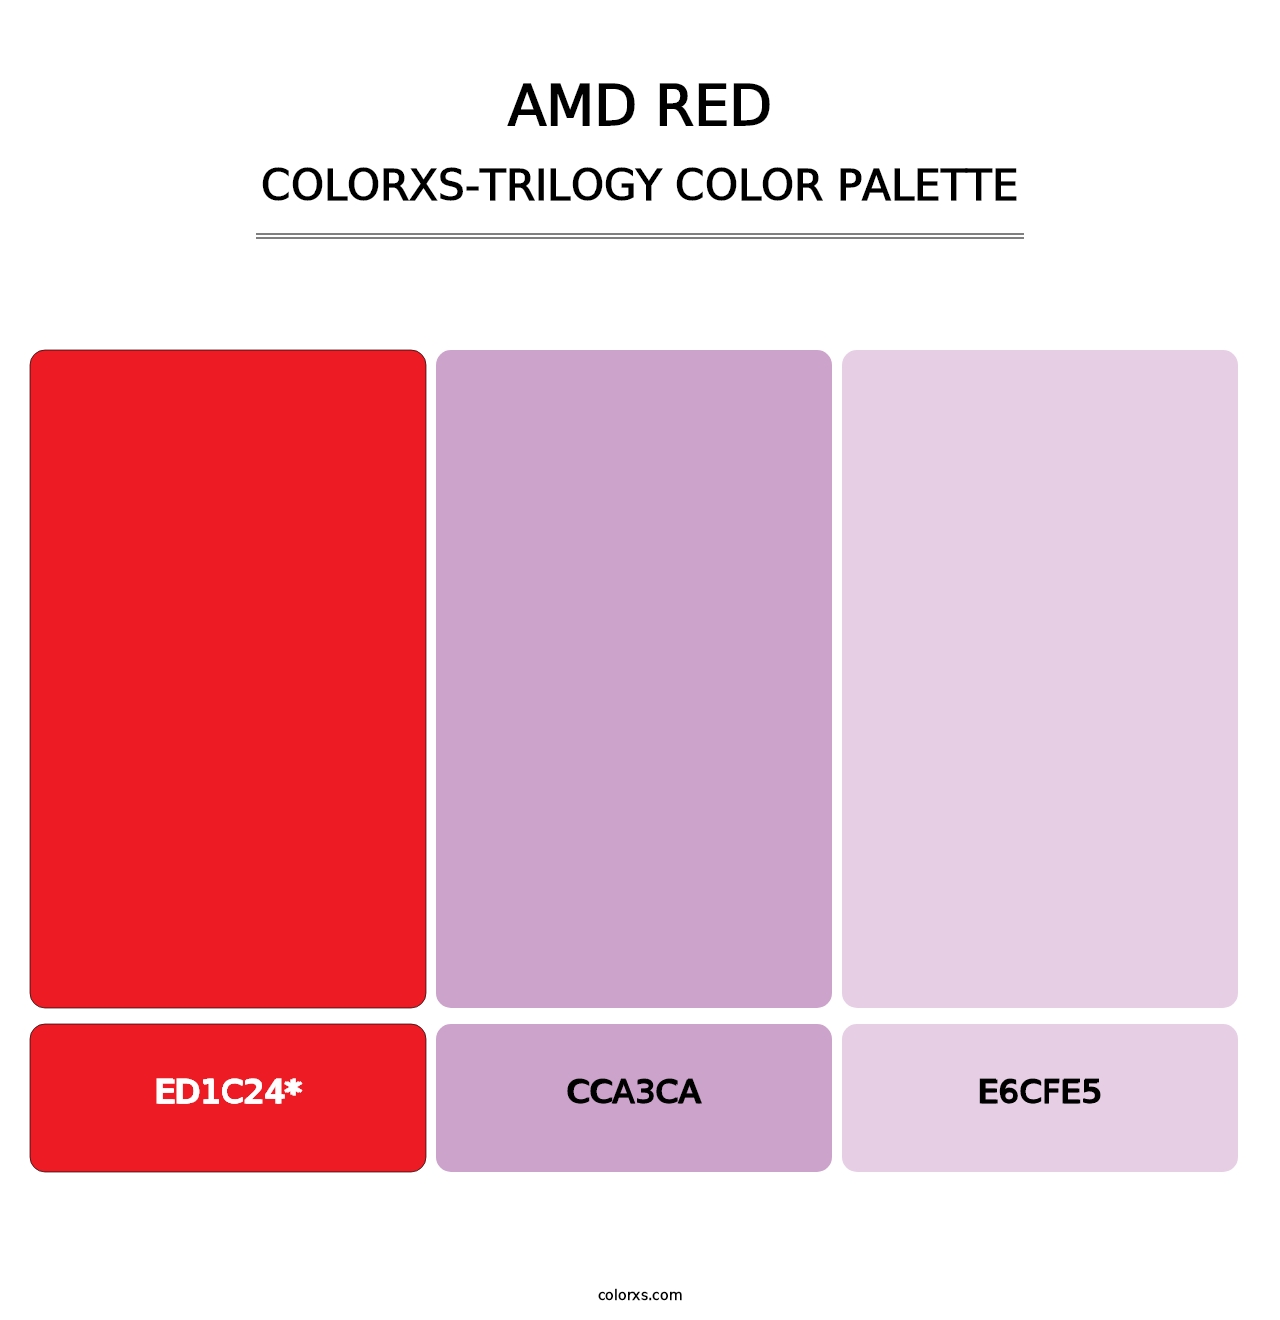 AMD Red - Colorxs Trilogy Palette